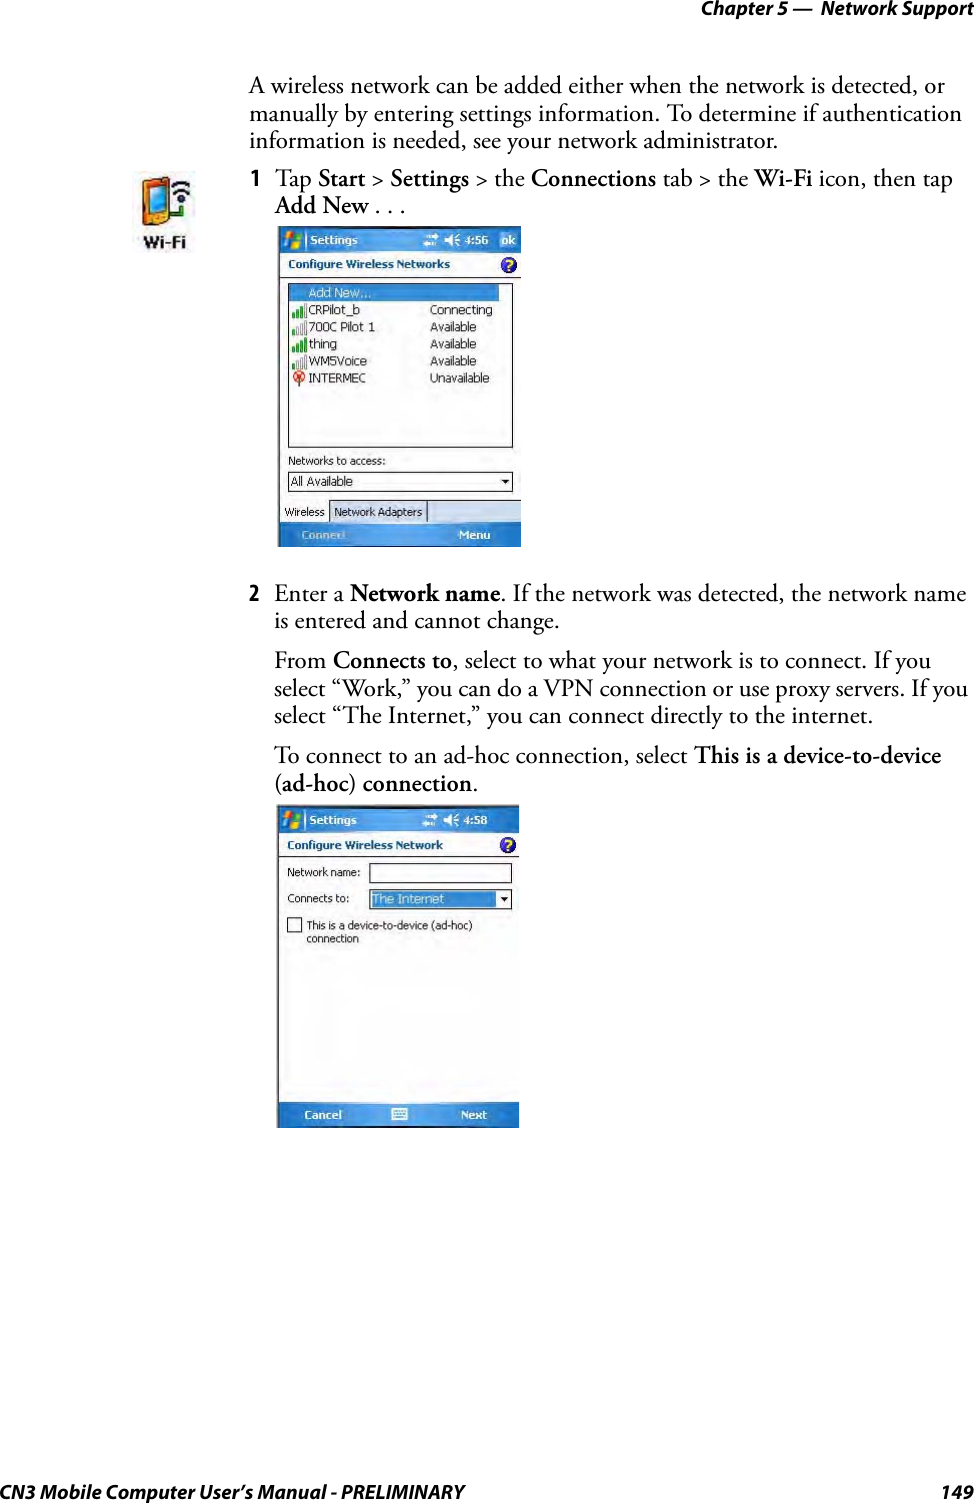 Chapter 5 —  Network SupportCN3 Mobile Computer User’s Manual - PRELIMINARY 149A wireless network can be added either when the network is detected, or manually by entering settings information. To determine if authentication information is needed, see your network administrator.2Enter a Network name. If the network was detected, the network name is entered and cannot change.From Connects to, select to what your network is to connect. If you select “Work,” you can do a VPN connection or use proxy servers. If you select “The Internet,” you can connect directly to the internet.To connect to an ad-hoc connection, select This is a device-to-device (ad-hoc) connection.1Tap Start &gt; Settings &gt; the Connections tab &gt; the Wi-Fi icon, then tap Add New . . .